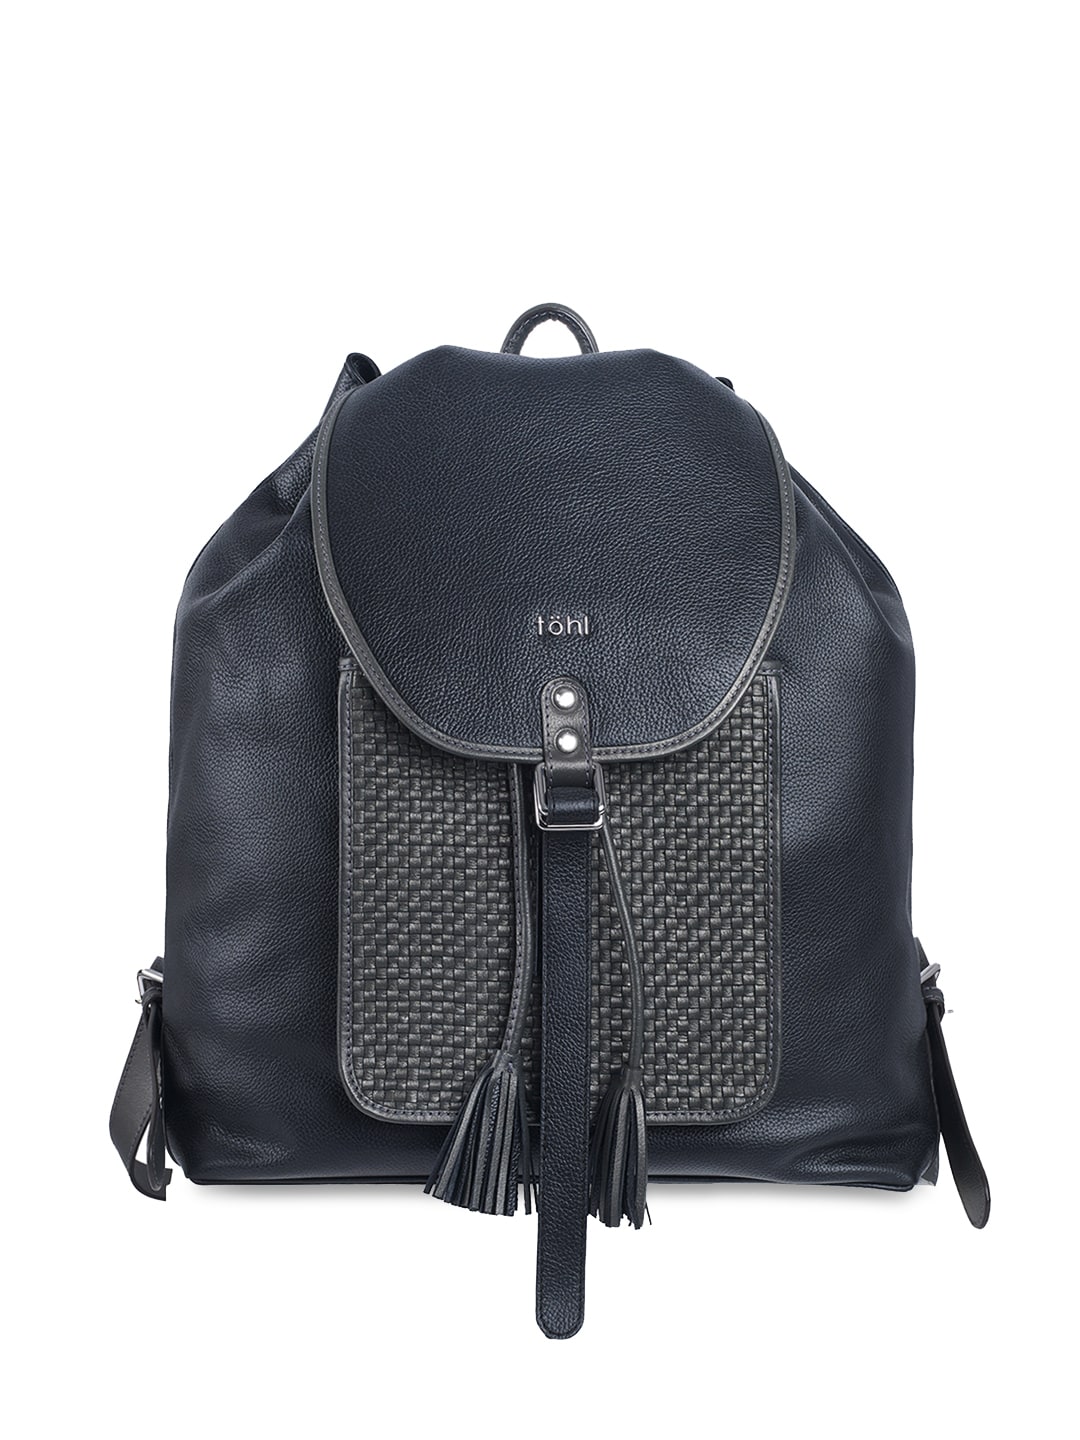 tohl Women Black Textured Backpack Price in India